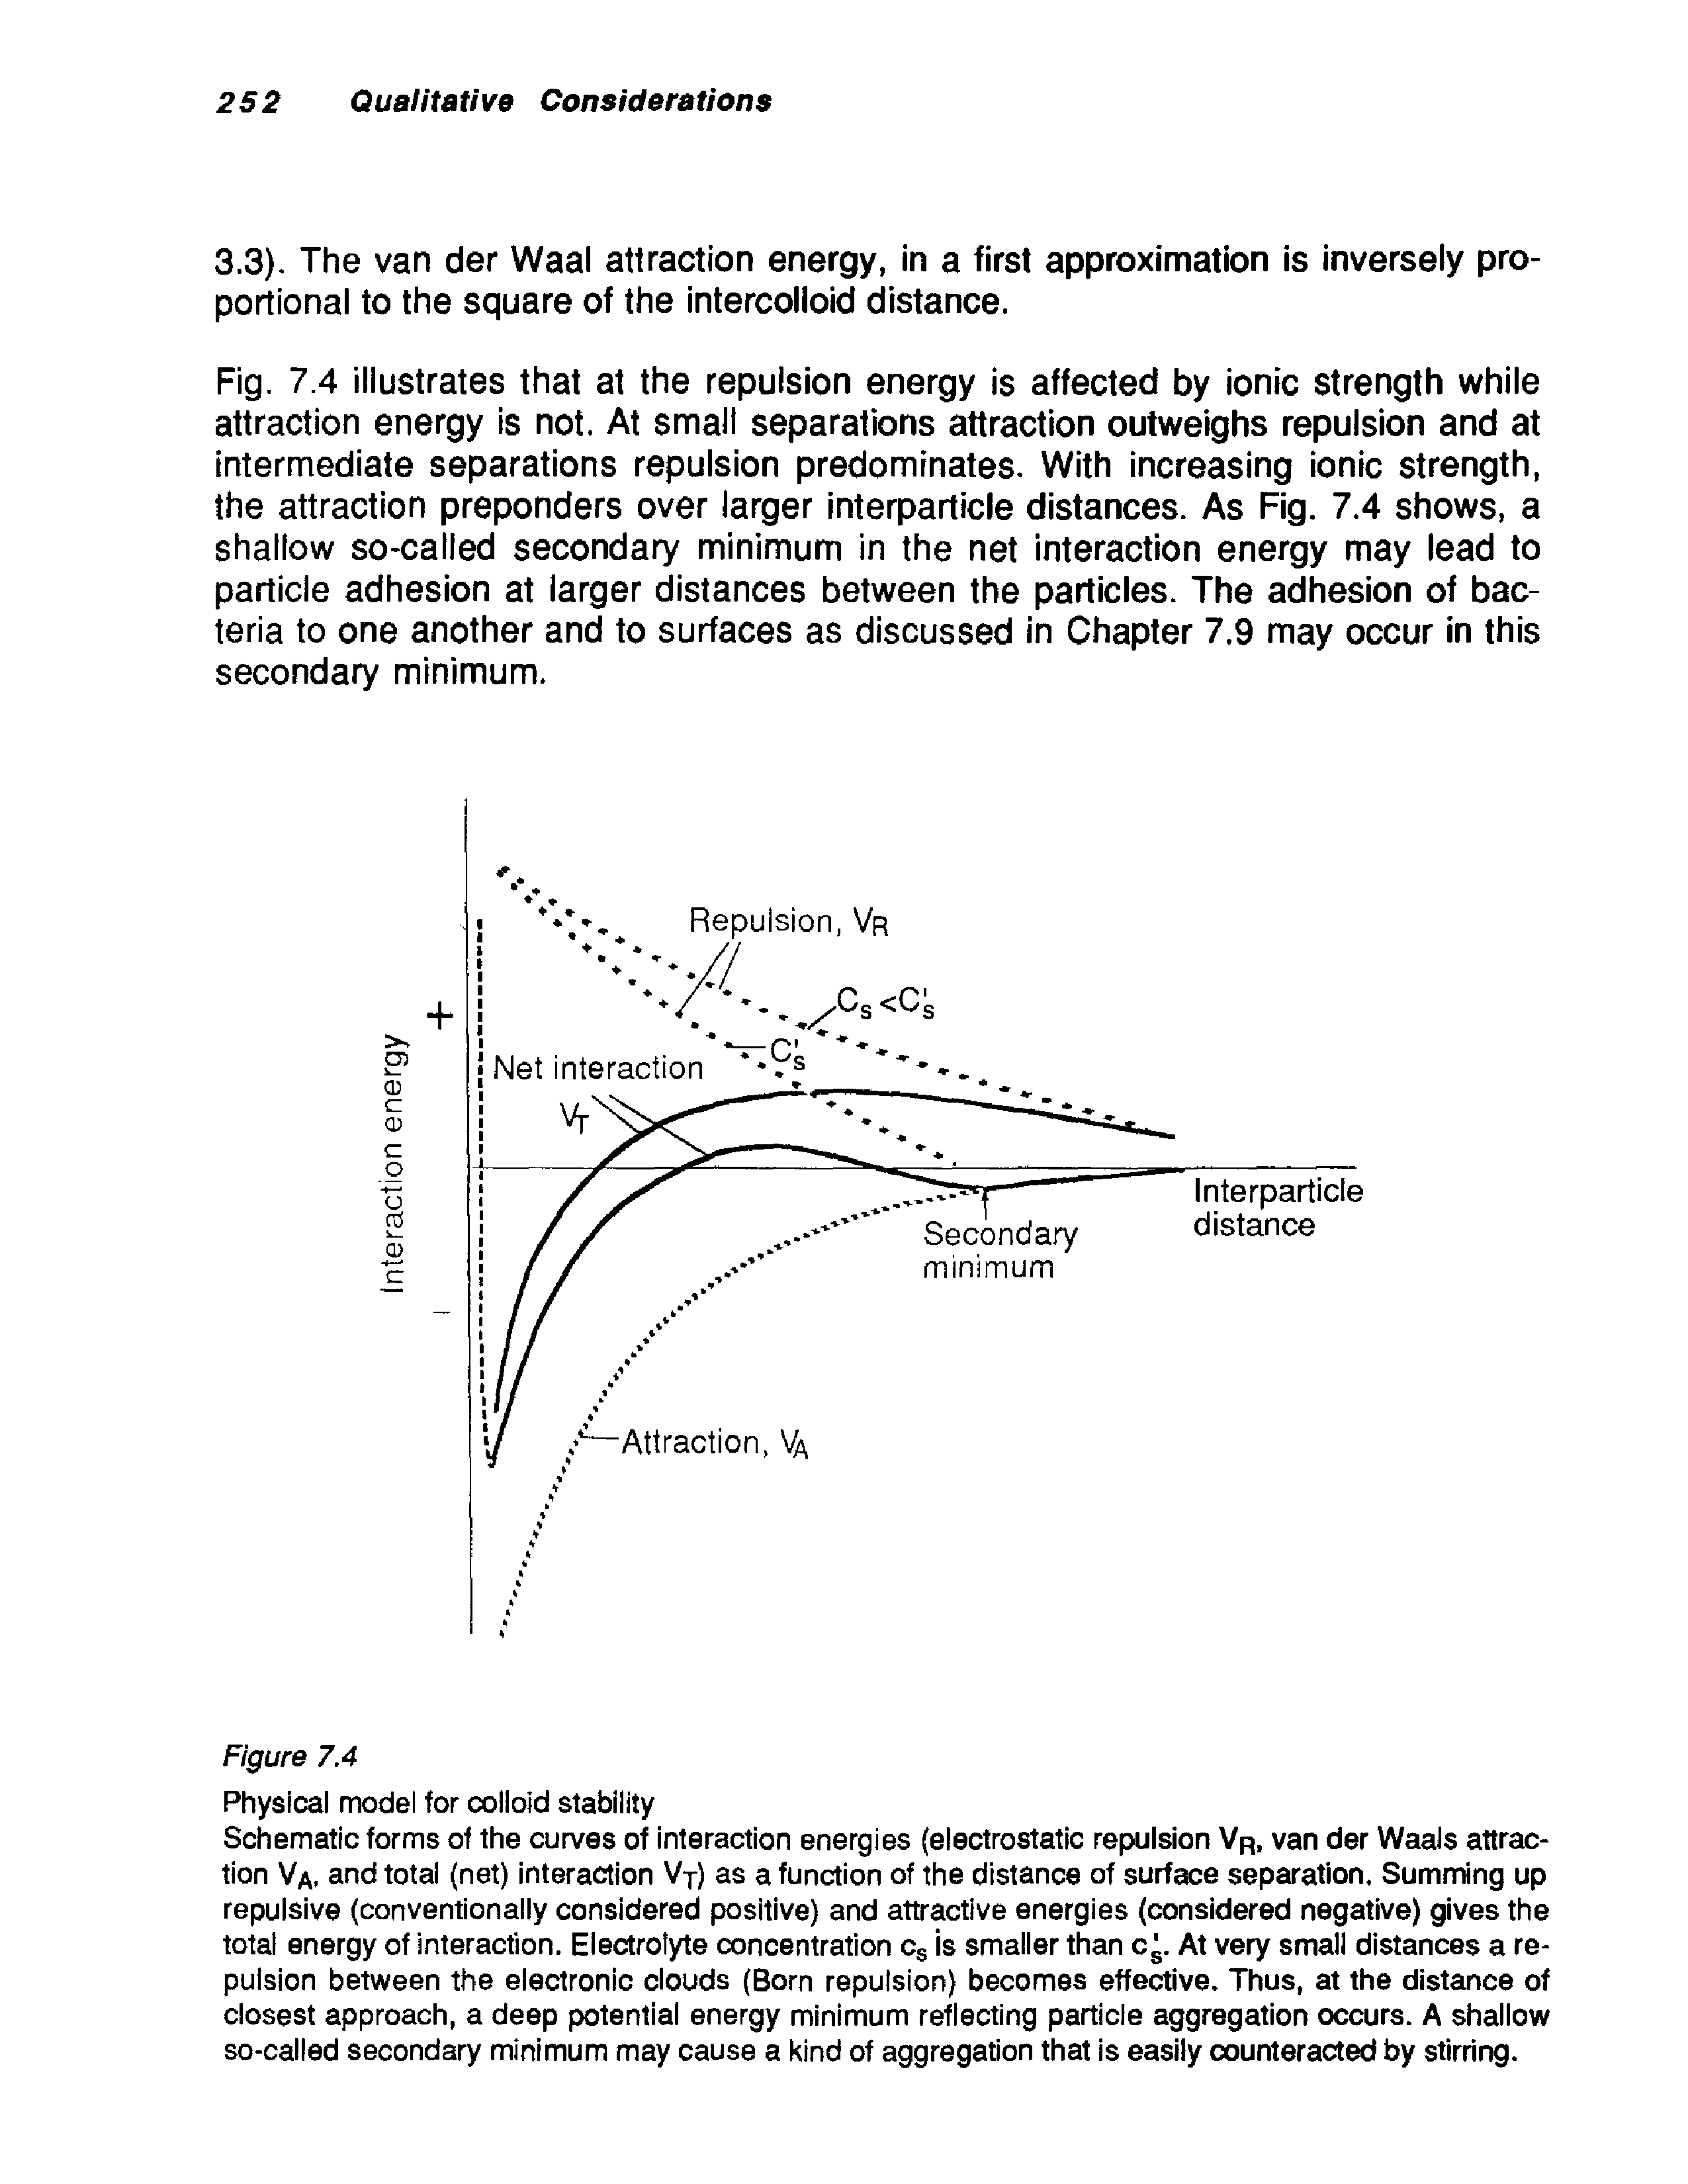 Schematic forms of the curves of interaction energies (electrostatic repulsion Vr, van der Waals attraction Va, and total (net) interaction Vj) as a function of the distance of surface separation. Summing up repulsive (conventionally considered positive) and attractive energies (considered negative) gives the total energy of interaction. Electrolyte concentration cs is smaller than cj. At very small distances a repulsion between the electronic clouds (Born repulsion) becomes effective. Thus, at the distance of closest approach, a deep potential energy minimum reflecting particle aggregation occurs. A shallow so-called secondary minimum may cause a kind of aggregation that is easily counteracted by stirring.